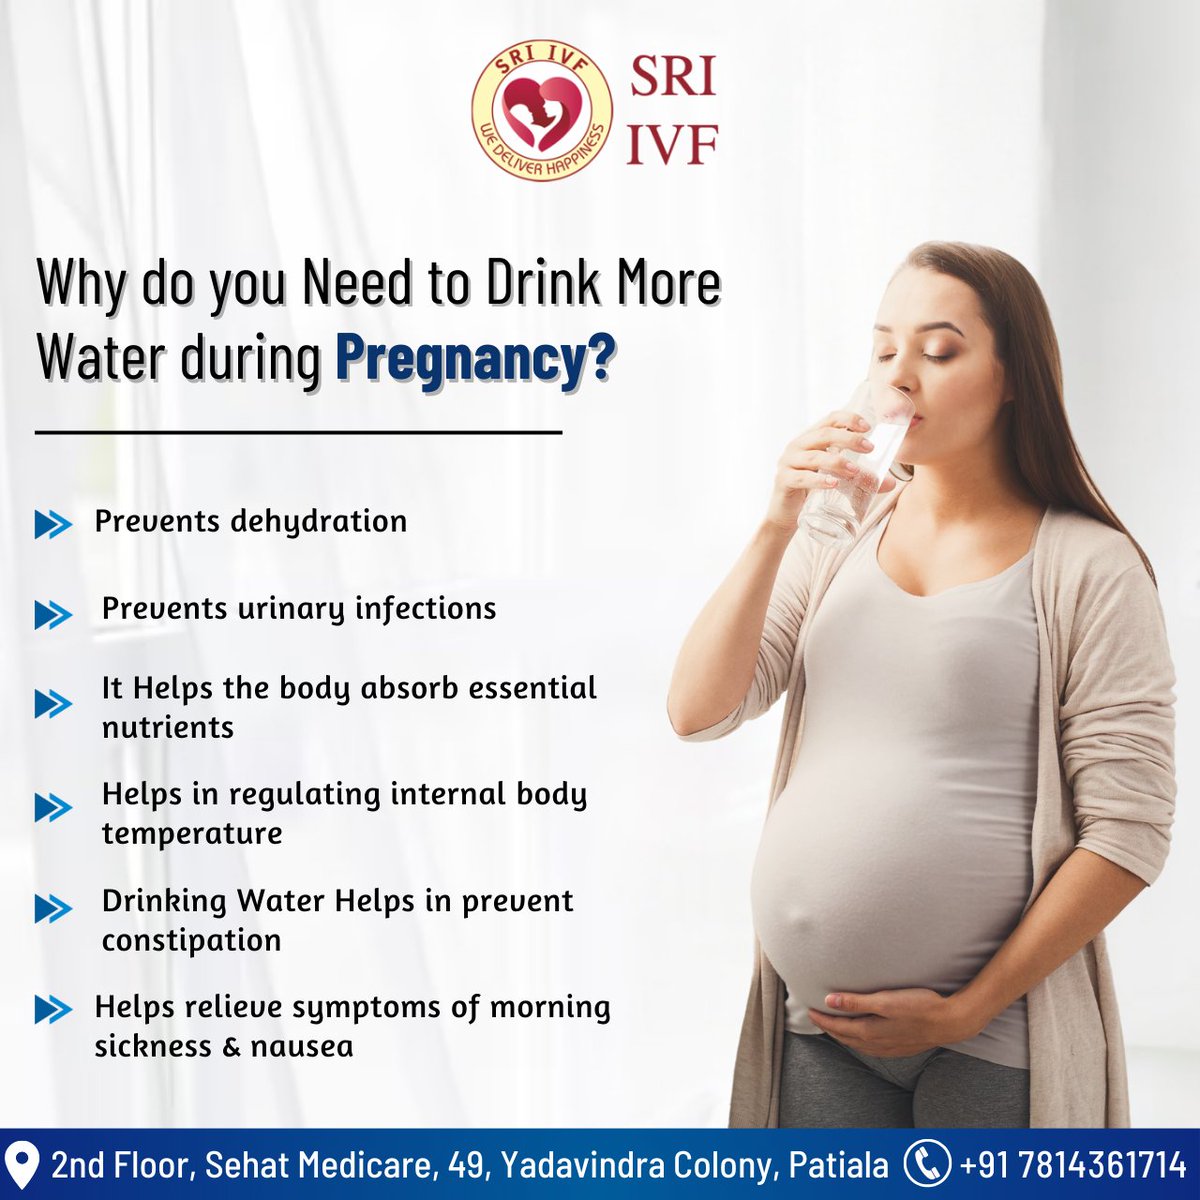 Stay hydrated during pregnancy to prevent dehydration, regulate body temperature, prevent urinary infections, relieve morning sickness, and ensure nutrient absorption. #Hydration #HealthyPregnancy #PregnancyTips #bestivfclinic #ivfcentre #ivfhospital #sriivf #patiala #punjab